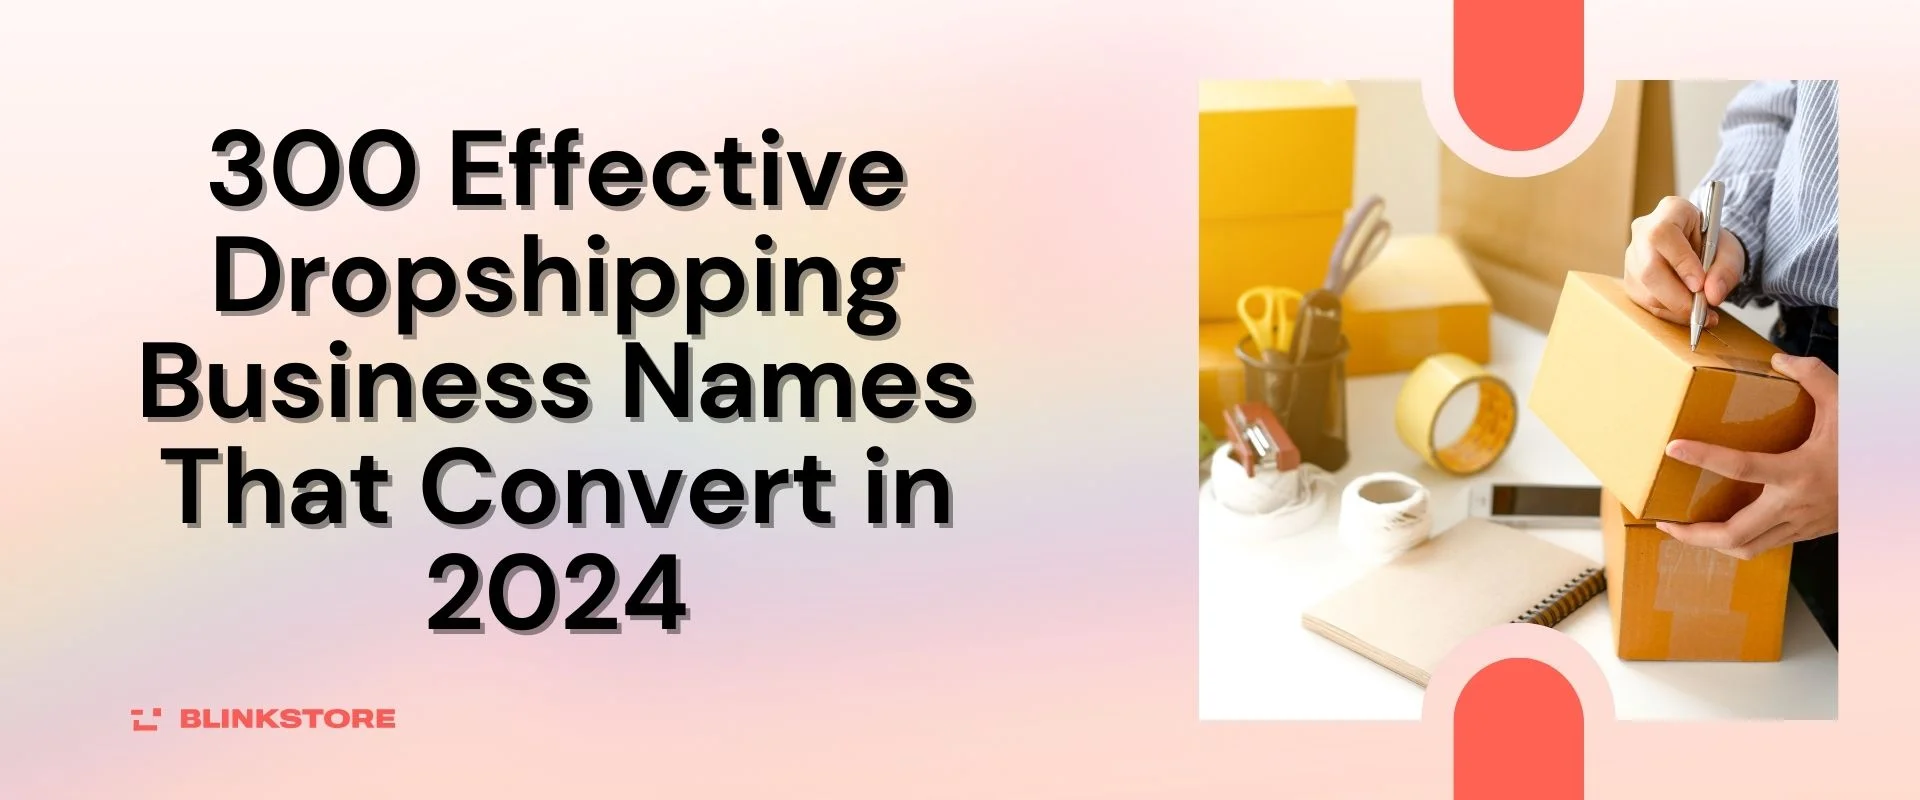 300 Effective Dropshipping Business Names That Convert in 2024